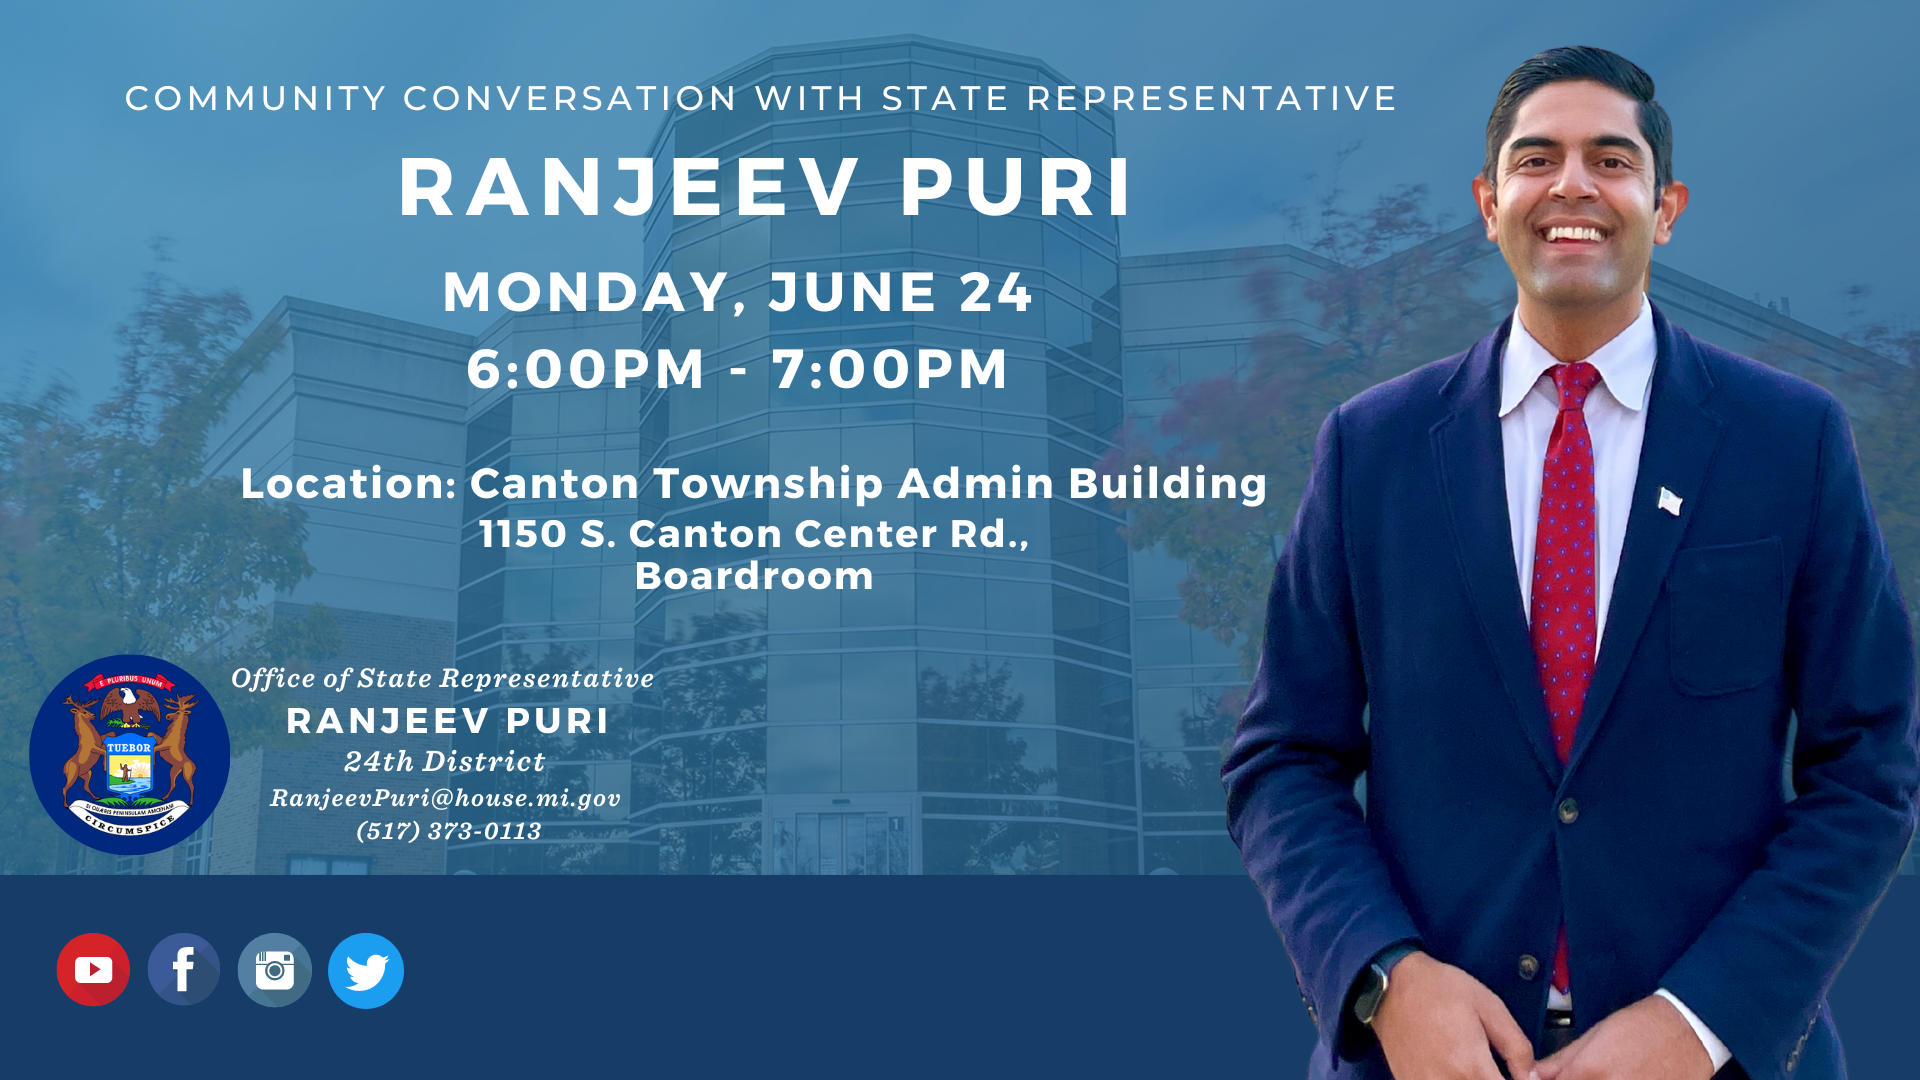 Infographic inviting constituents to state Rep. Ranjeev Puri's June 24 coffee hour from 6-7pm at the Canton Township Administration Building.